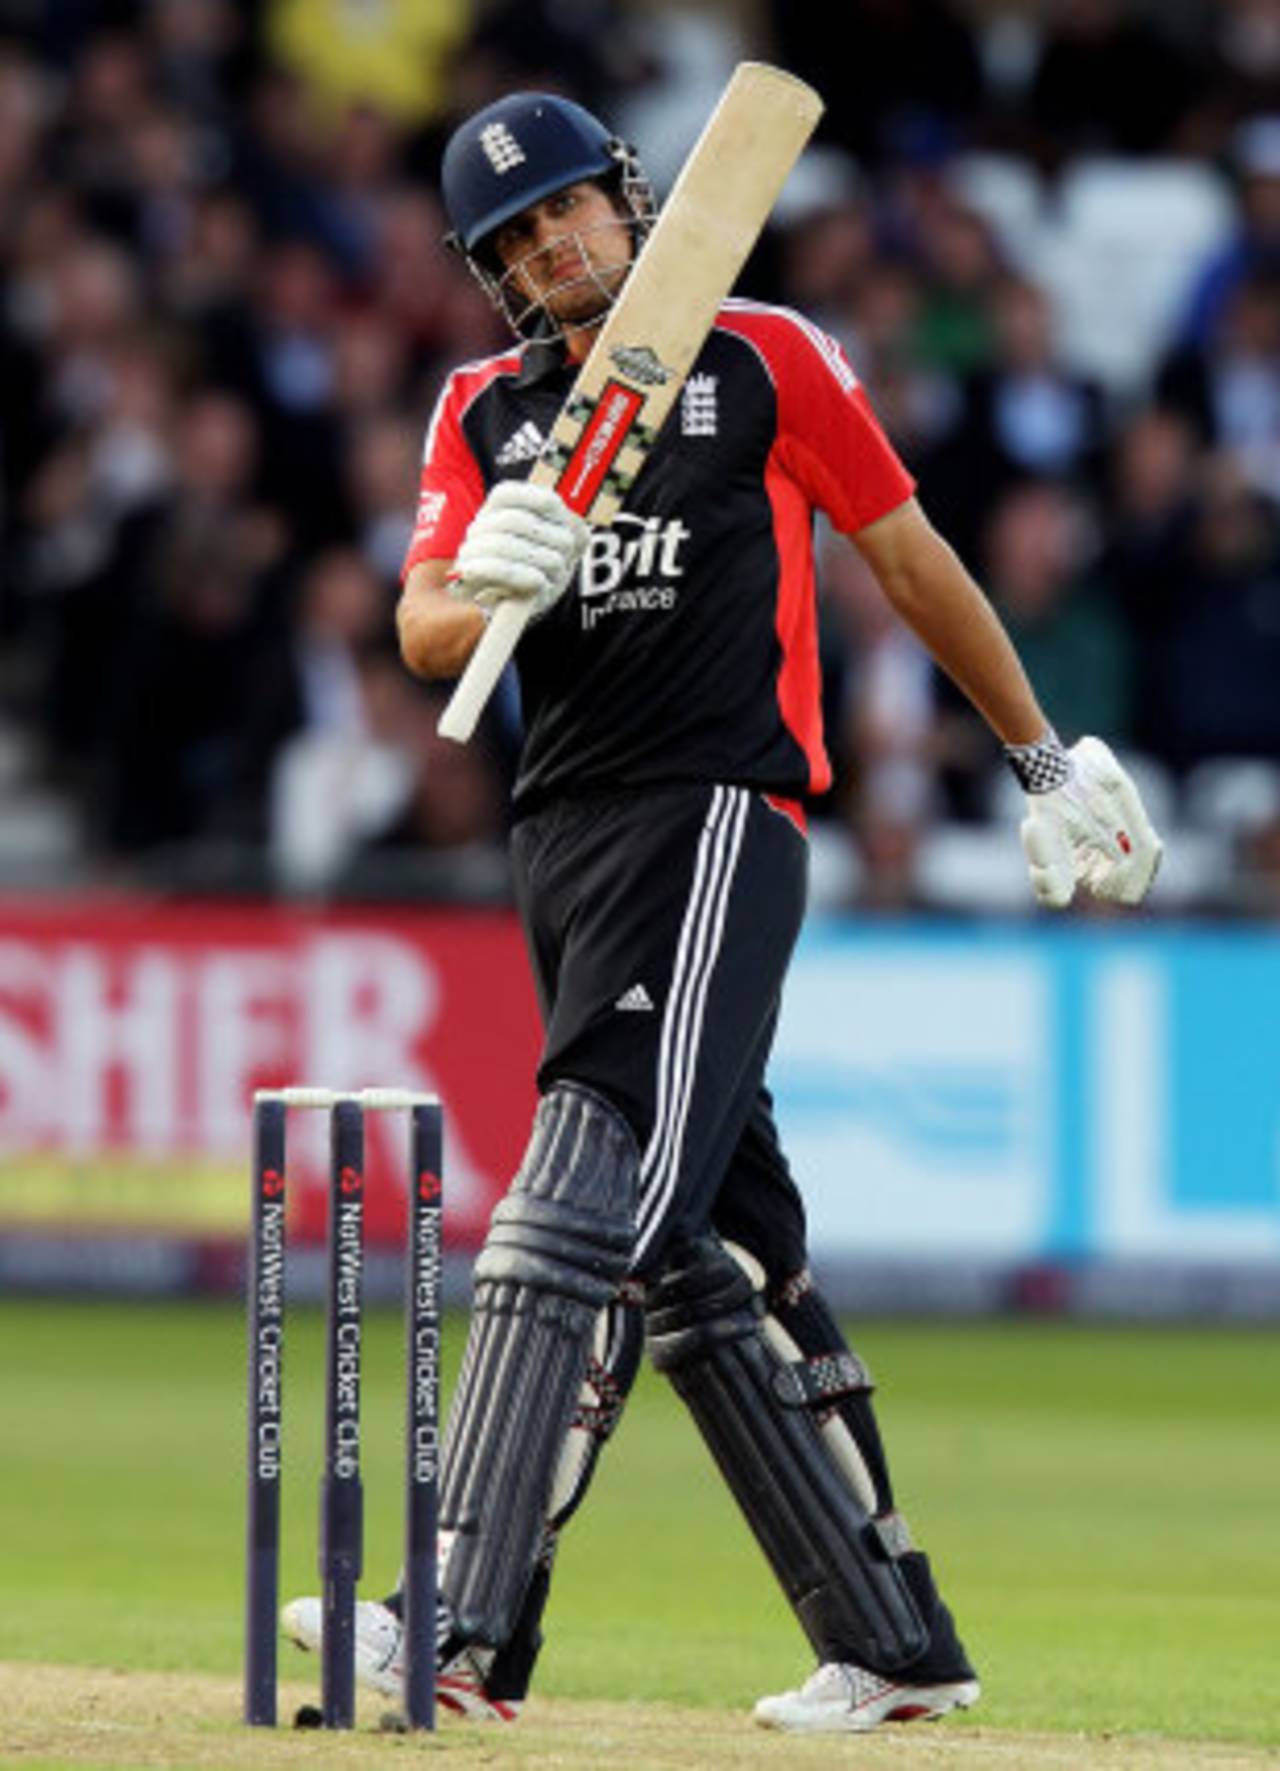 Alastair Cook sped to a 37-ball half-century as England romped to victory, England v Sri Lanka, 4th ODI, Trent Bridge, July 6 2011